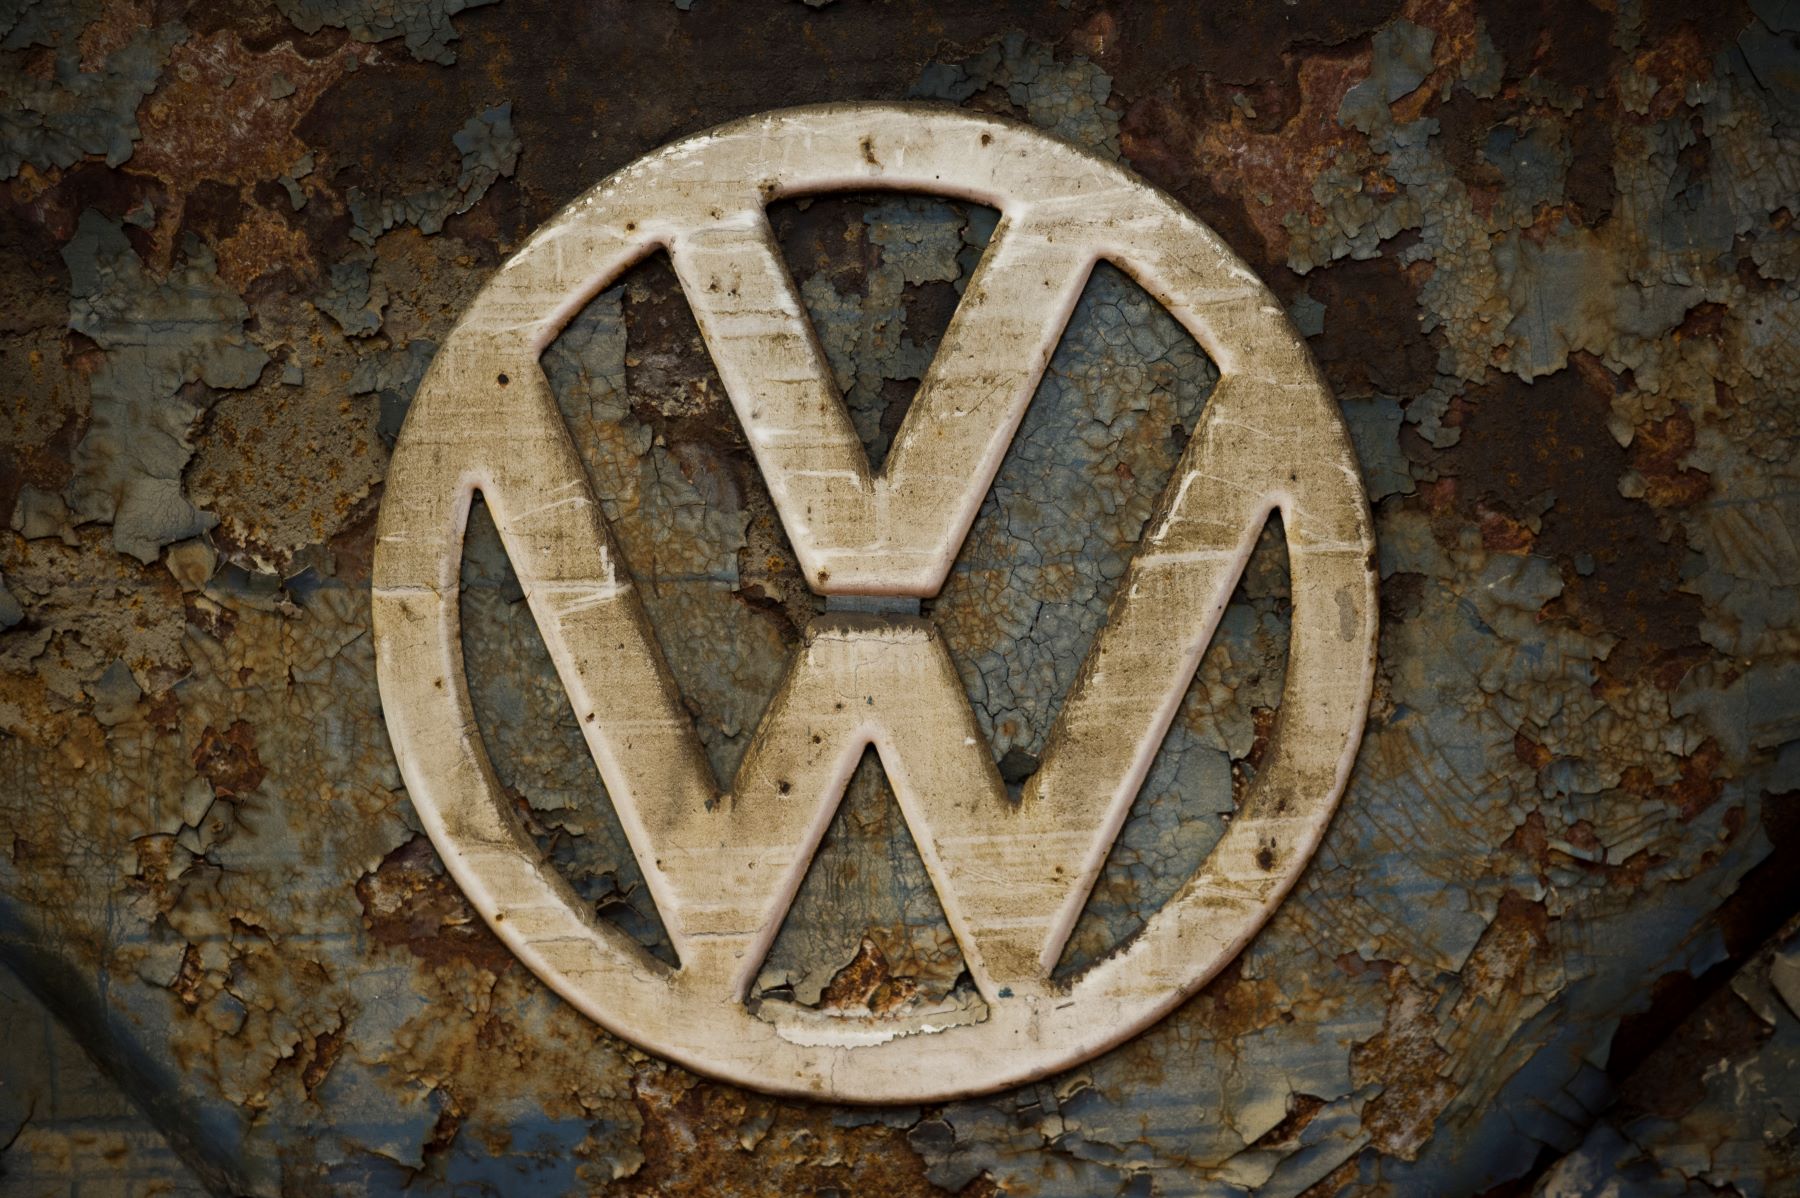 A worn and rusted Volkswagen VW logo on a T1 van built in 1951